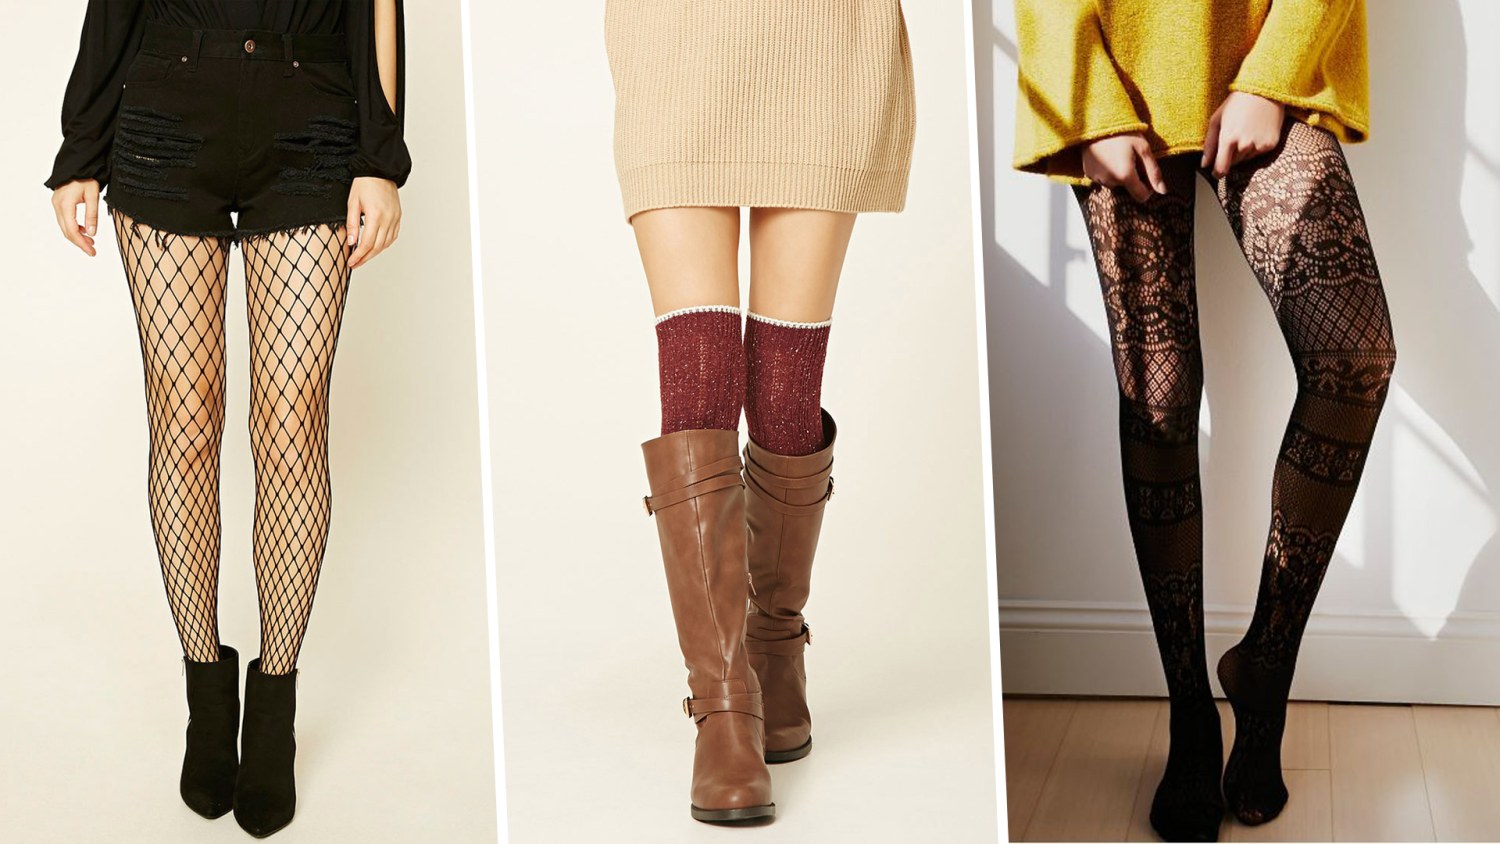 Tights, socks ideas and pantyhose styles to buy now